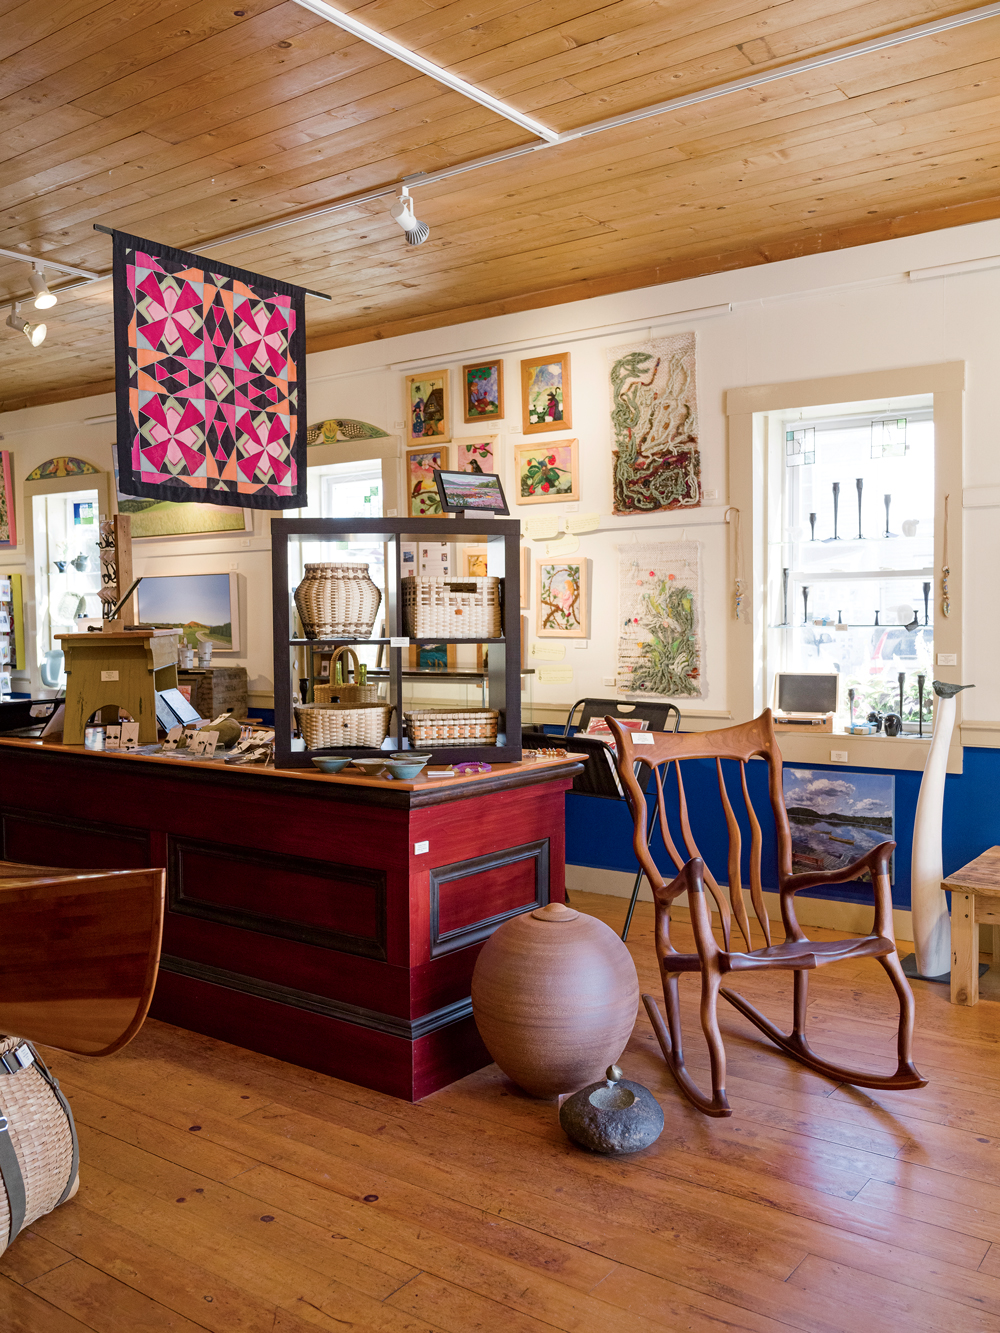 Miller’s Thumb in Greensboro offers fine art and contemporary crafts in several media.